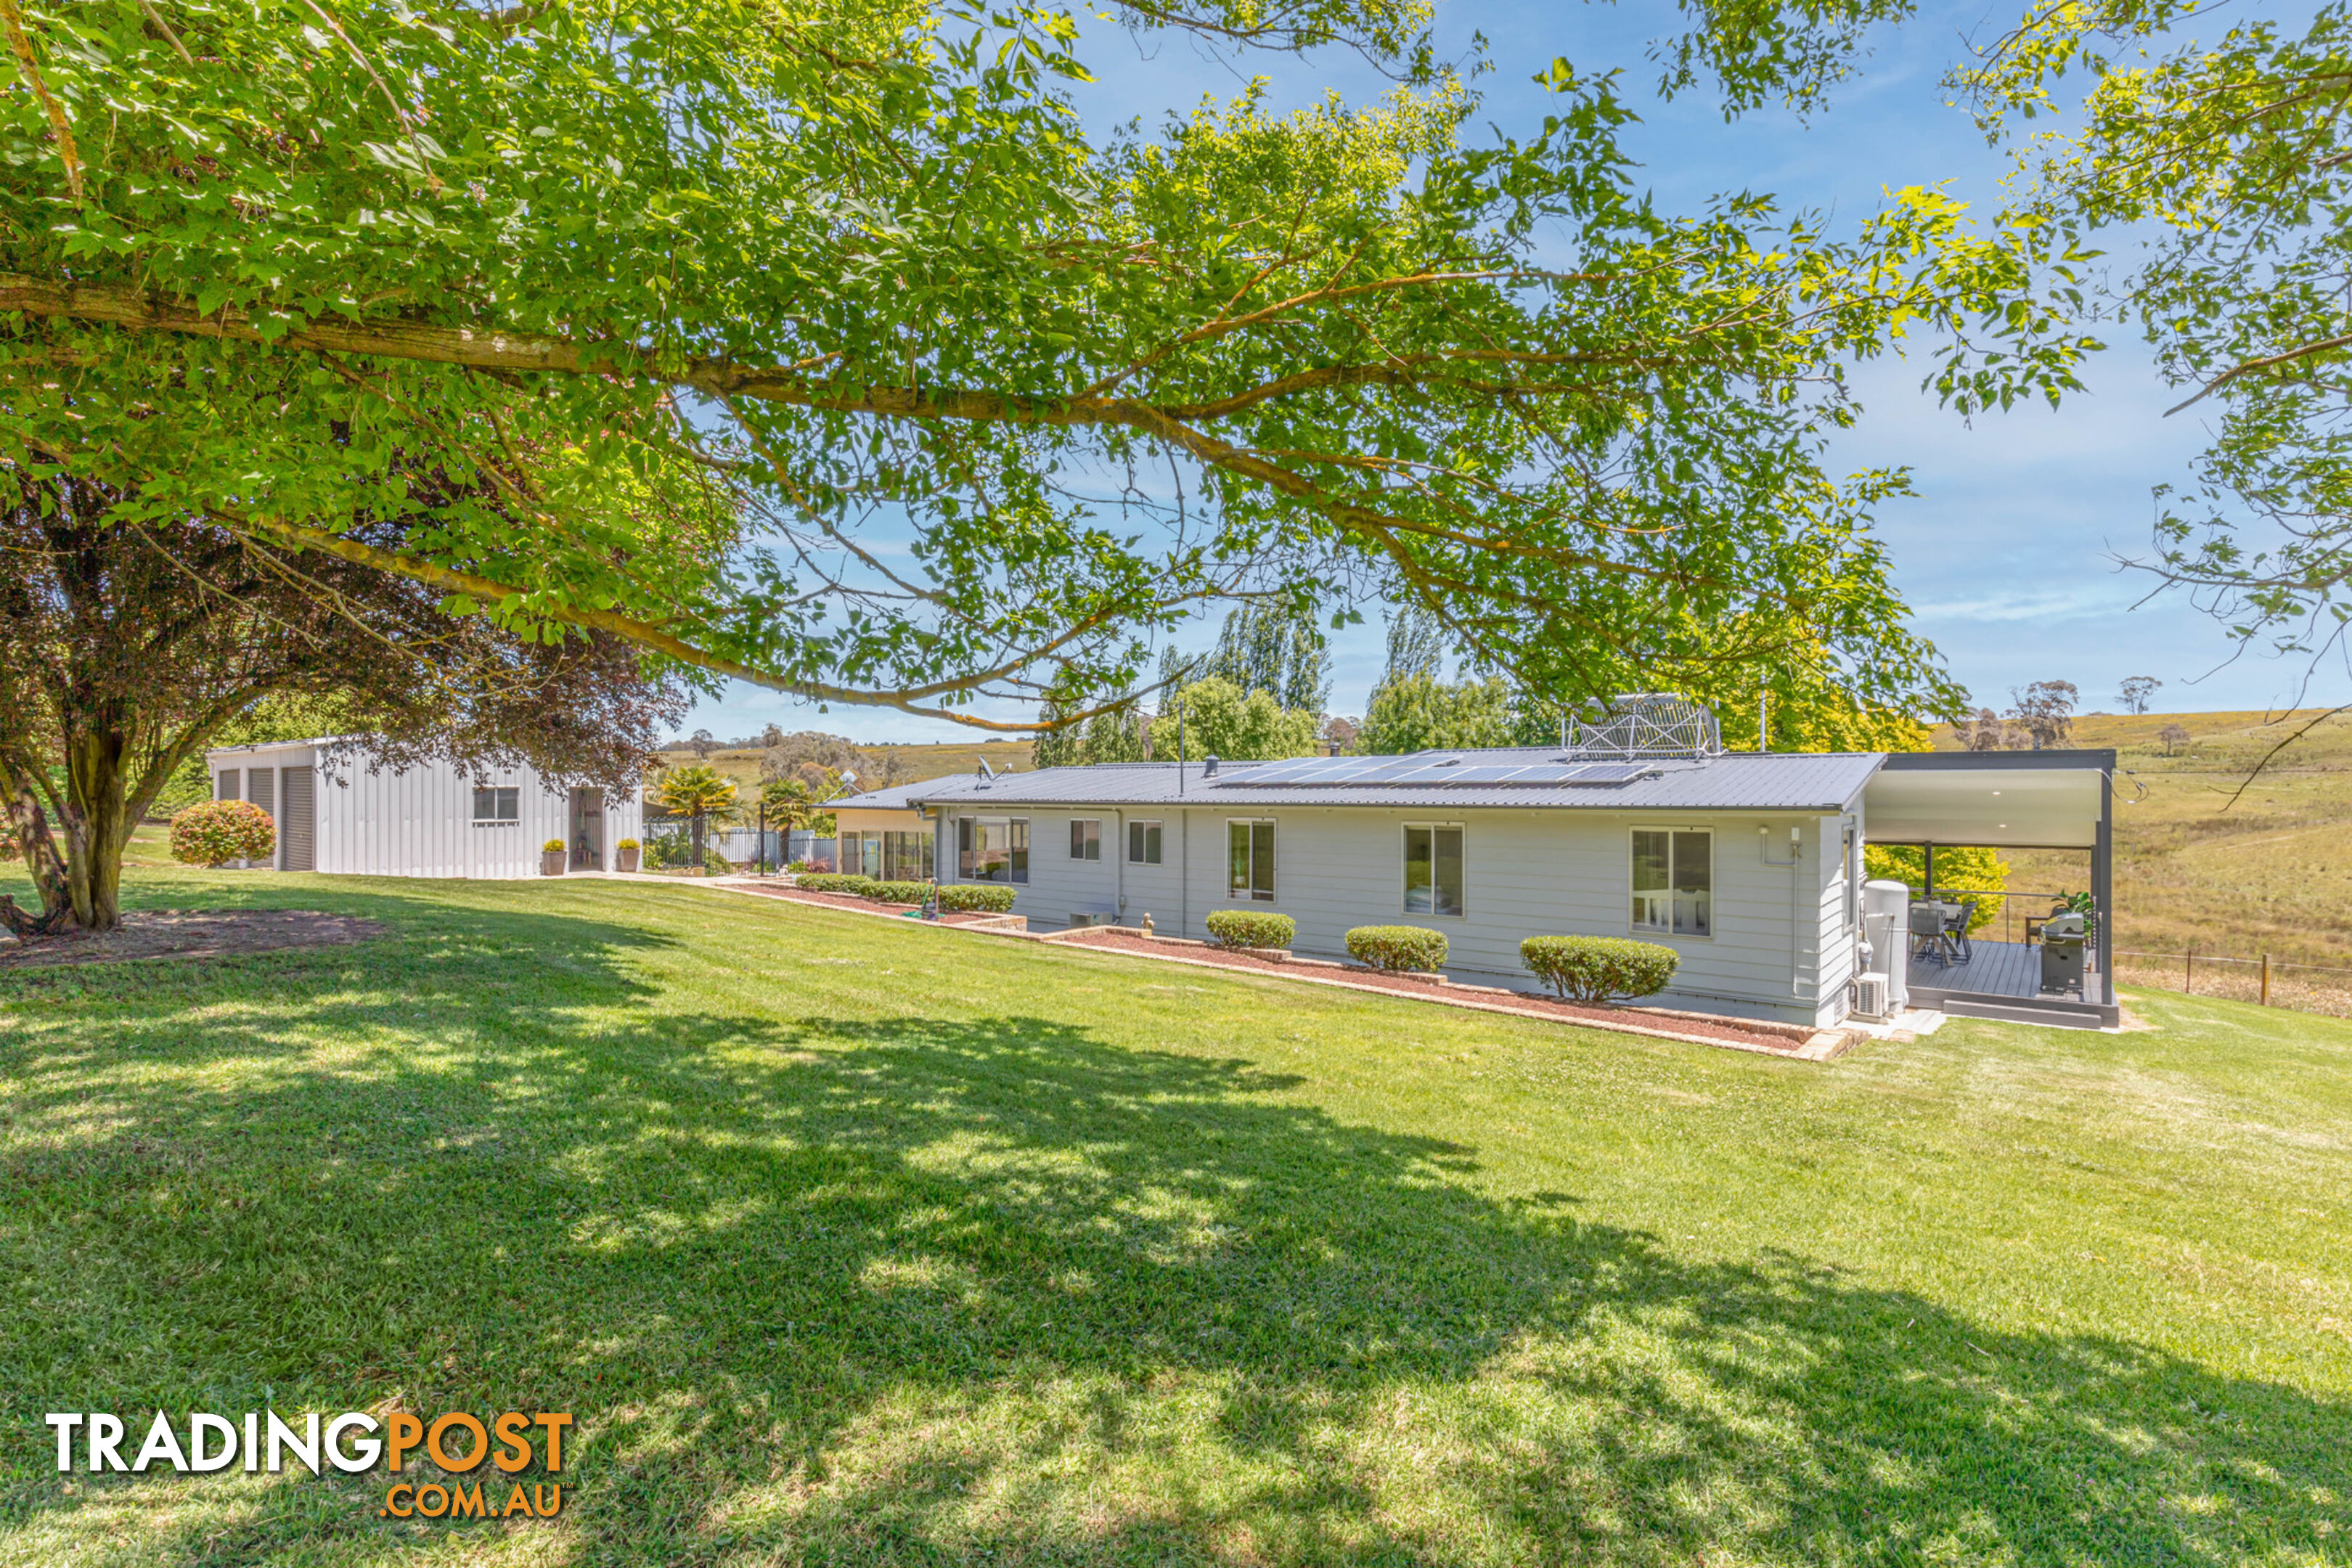 156 Irondale Road PIPERS FLAT NSW 2847